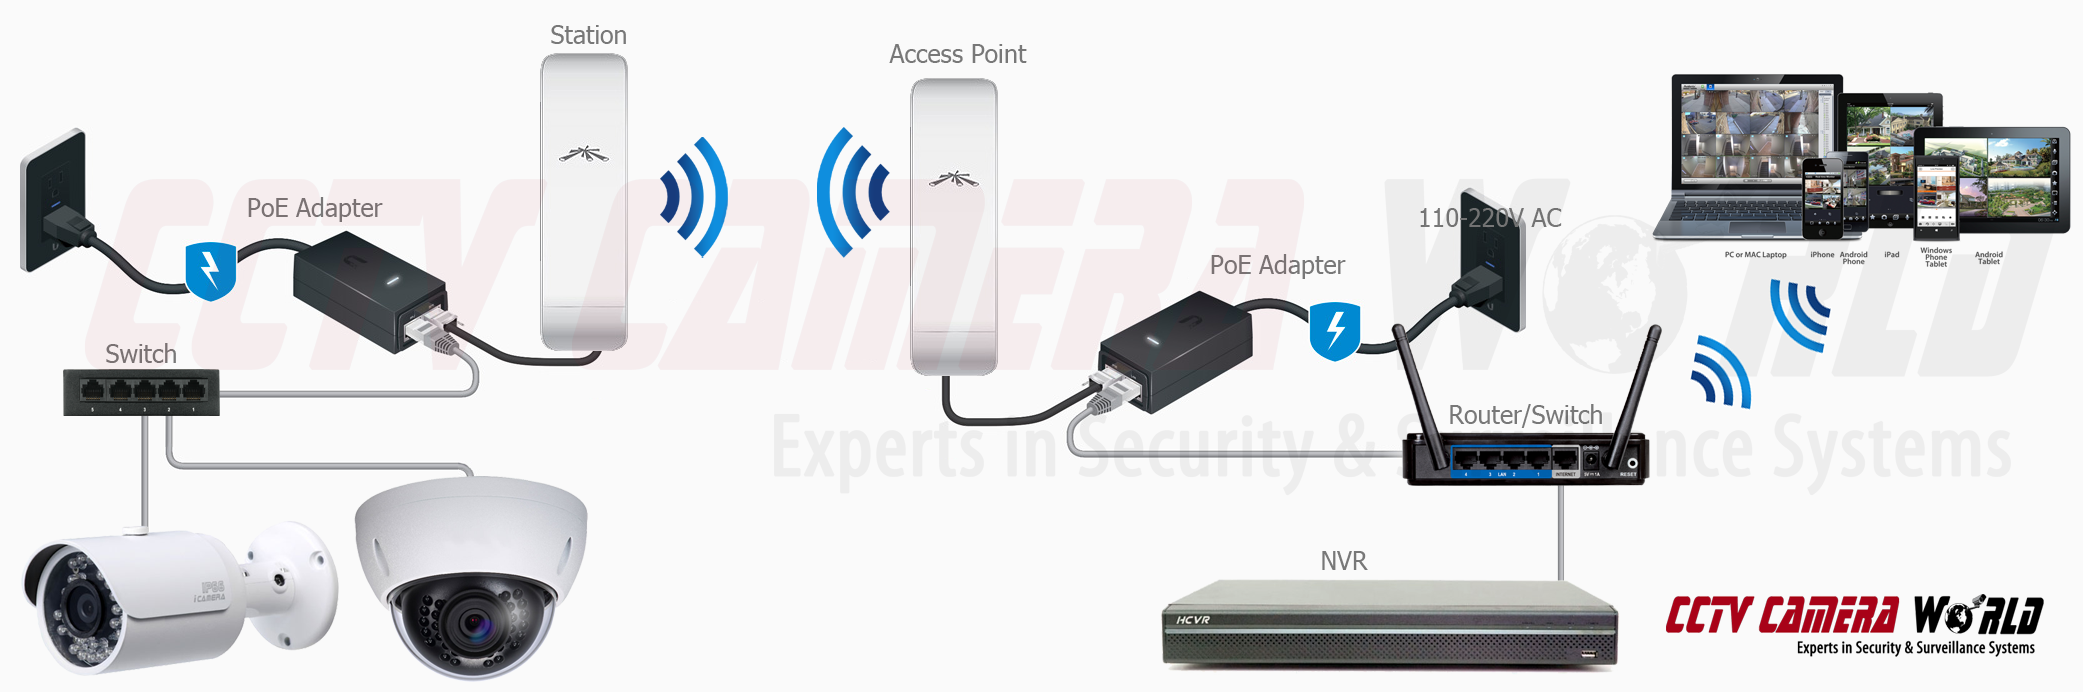 How To Setup A Point To Point Wireless Access Point Link